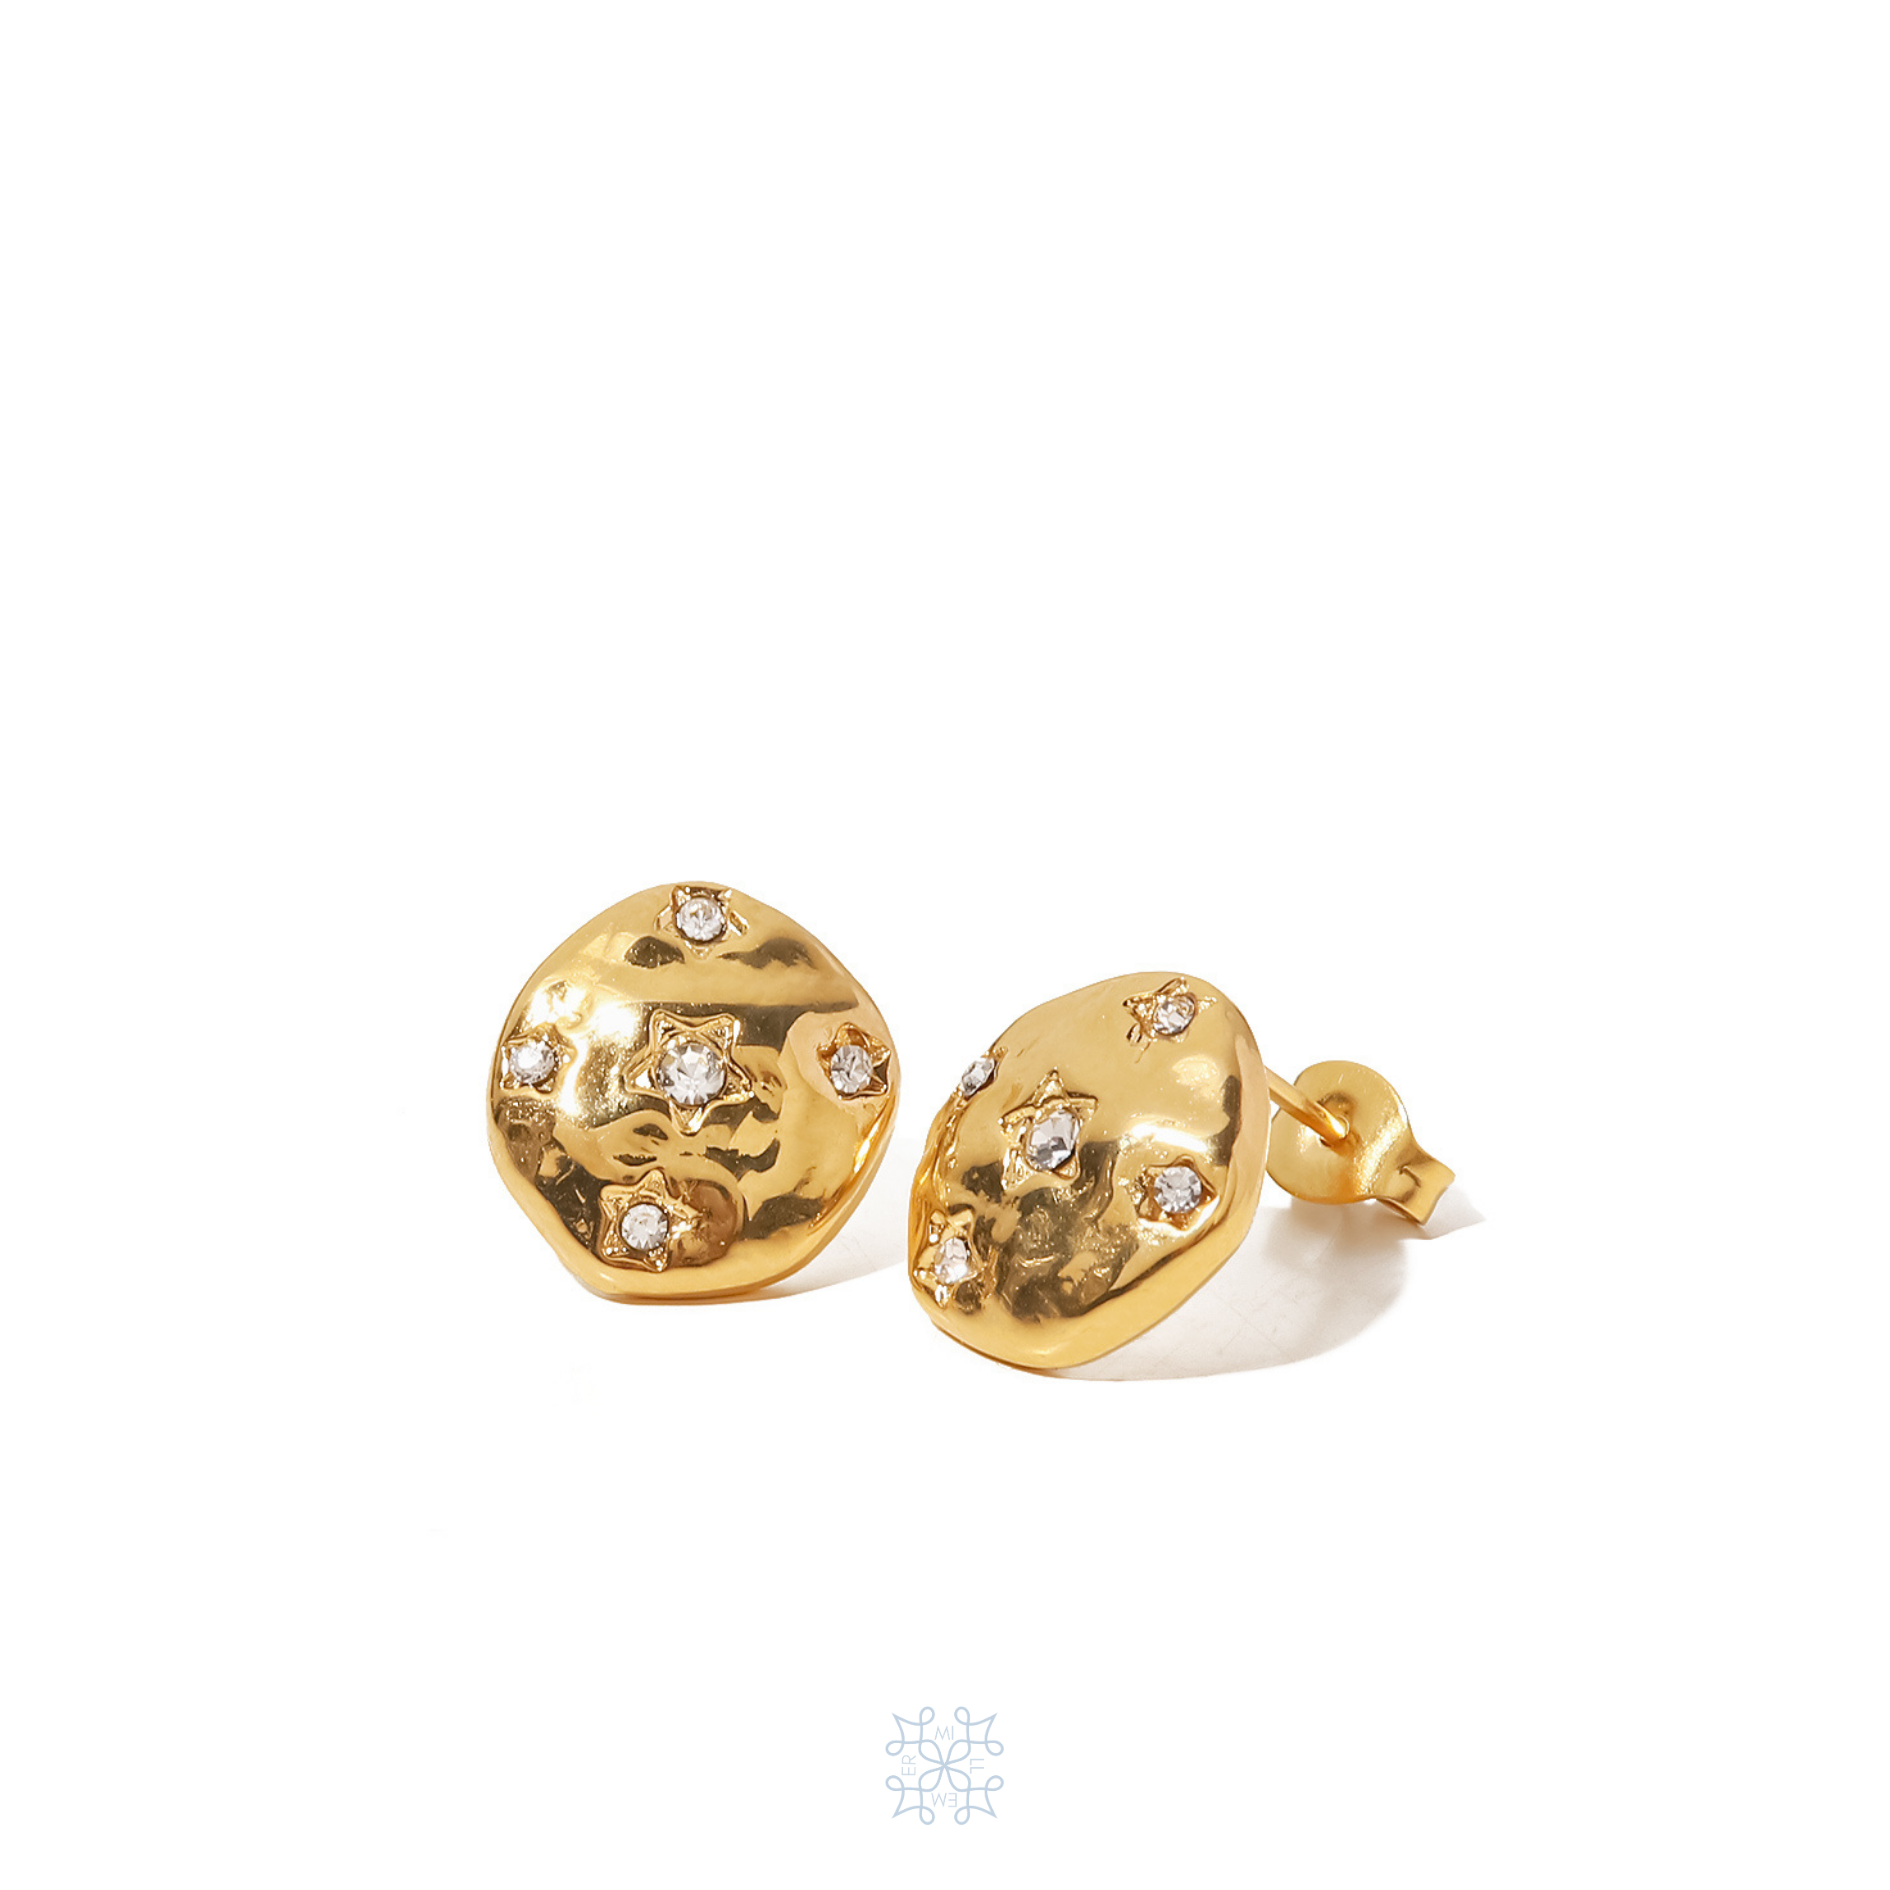 Gold Plated studs. Irregular circle shape. Irregular surface texture. Five little star engraved on it. Each star has an zircon stone in the middle. Stardust Gold Zircon Stud Earrings